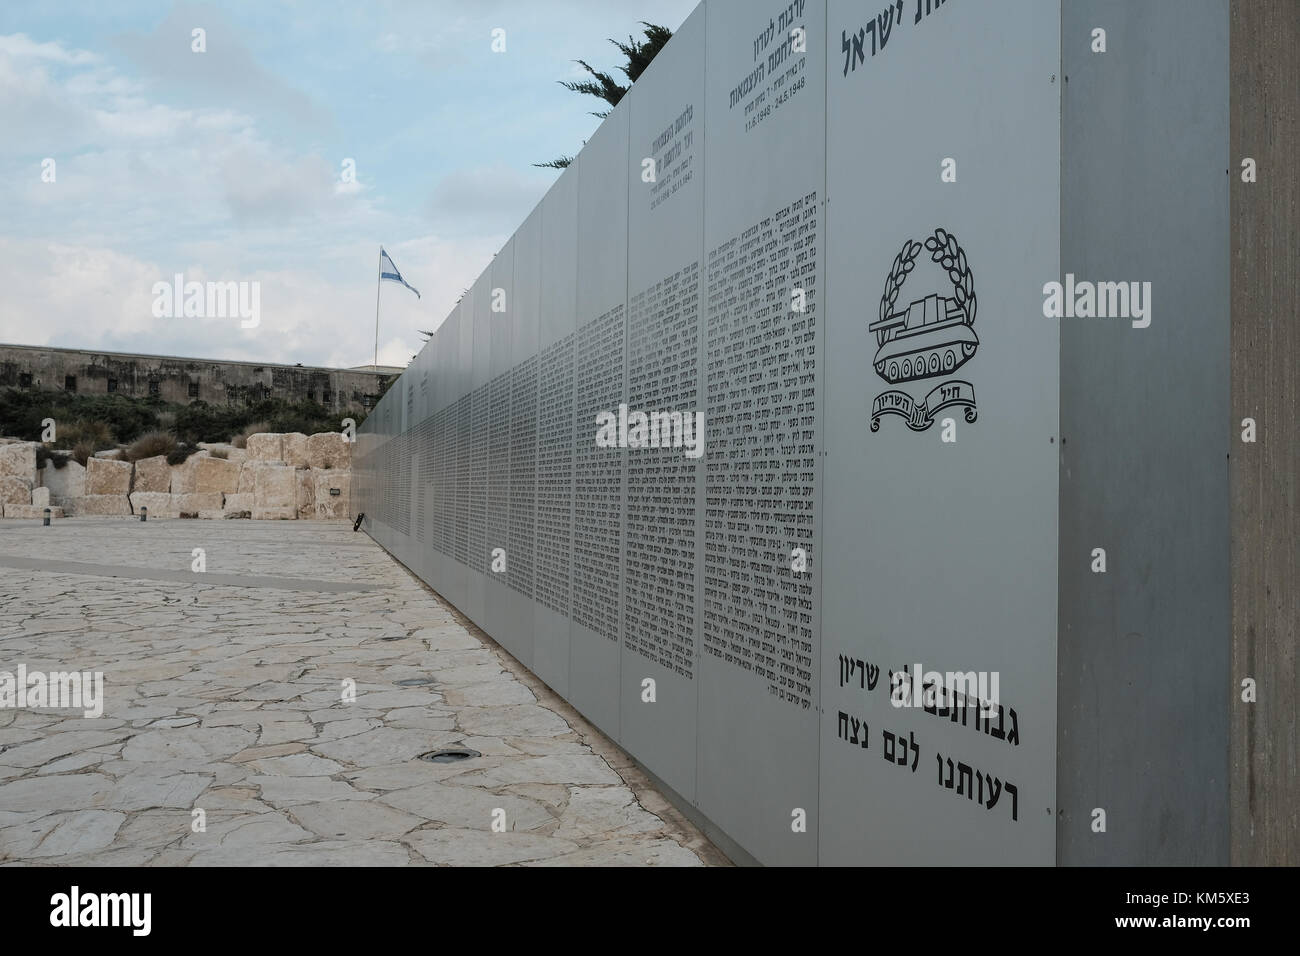 Latrun, Israel. 5th Dec, 2017. A memorial wall details the names of fallen soldiers as 13 female IDF soldiers graduate tank crew training at a ceremony at Yad LaShiryon, the Armored Corps Memorial Site at Latrun. These are the first women to serve in the Armored Corps as part of a pilot program. Having concluded tank training on Merkava Mark 3 tanks, female soldiers are destined to serve in the army's 80th Division, responsible for the southern Negev and Arava deserts, securing Israel's borders with Egypt and Jordan. Credit: Nir Alon/Alamy Live News Stock Photo